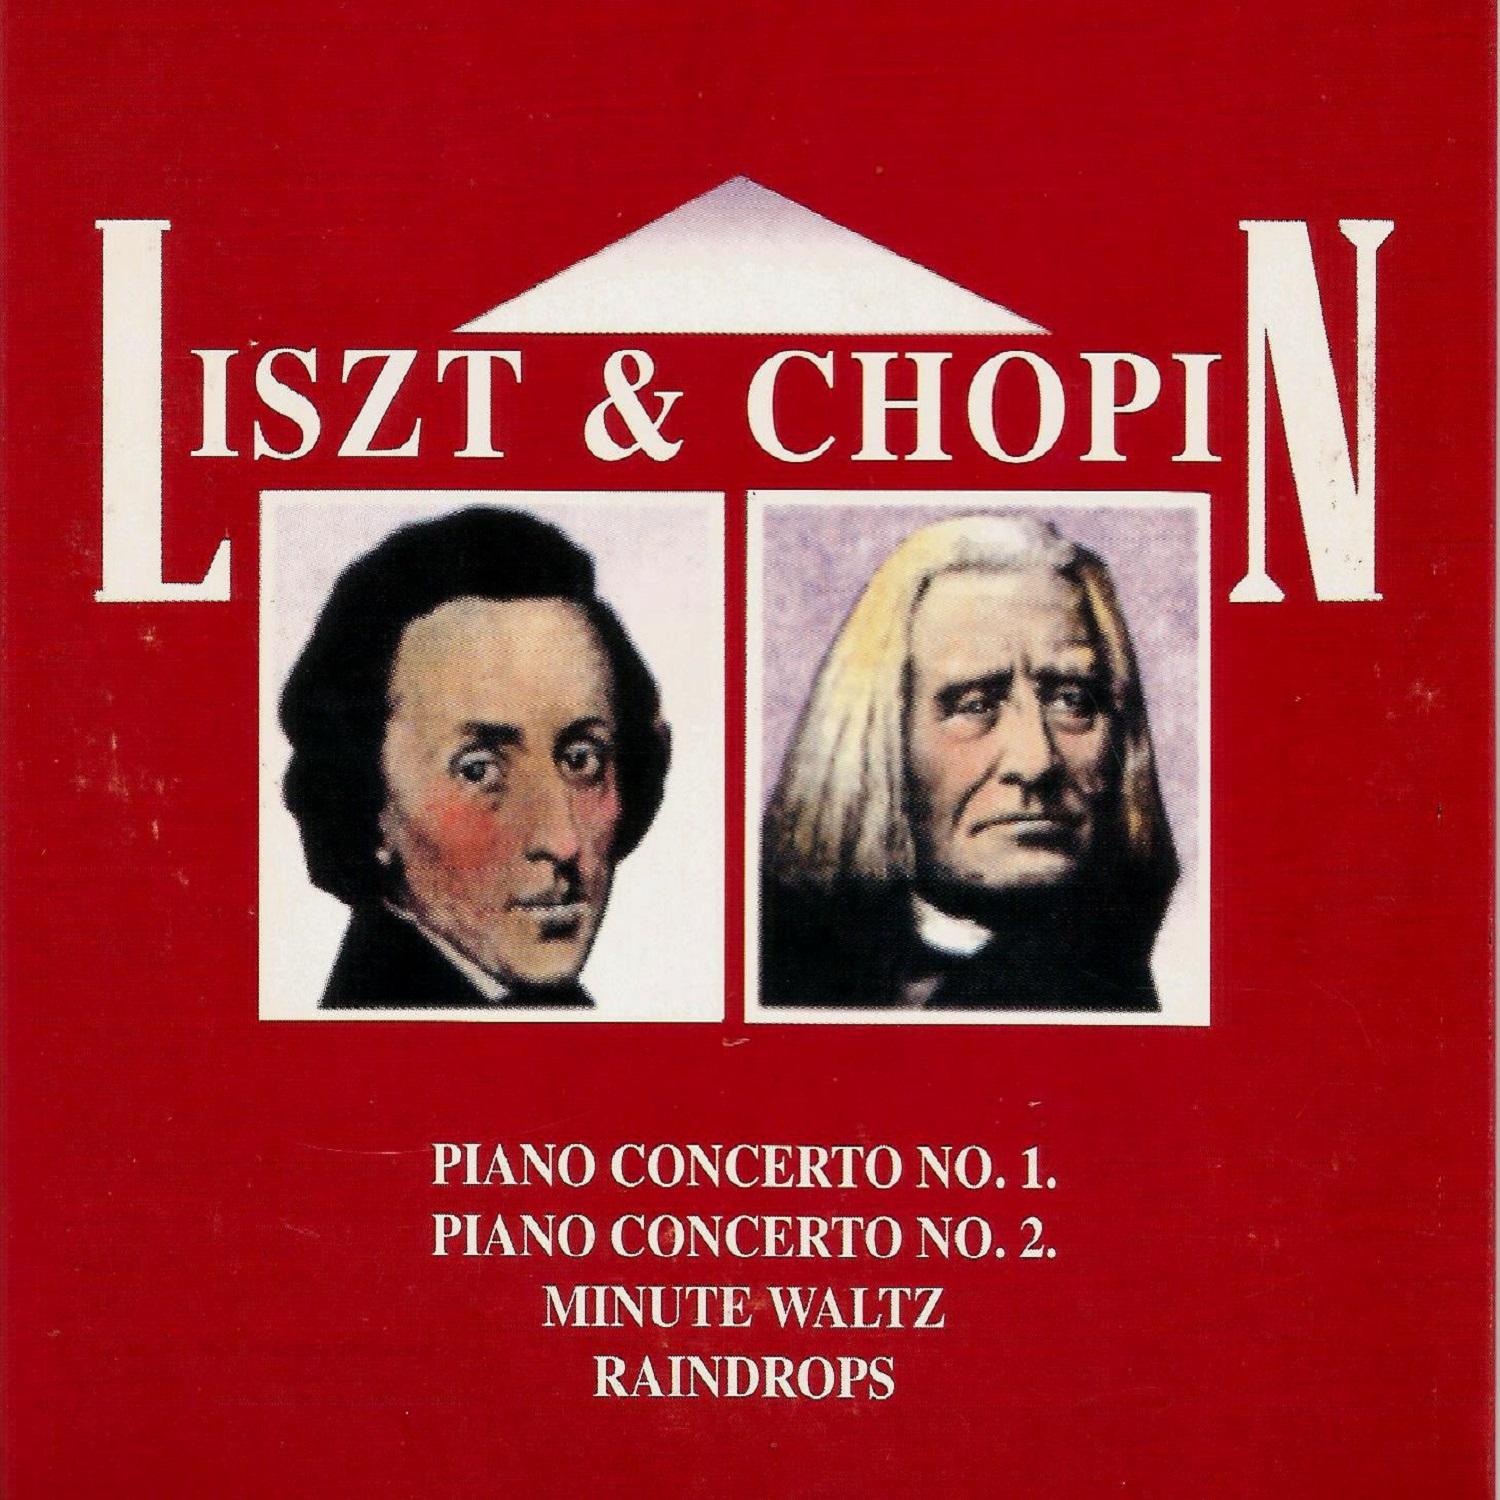 Preludes in A Major, Op. 28: VII. Andantino